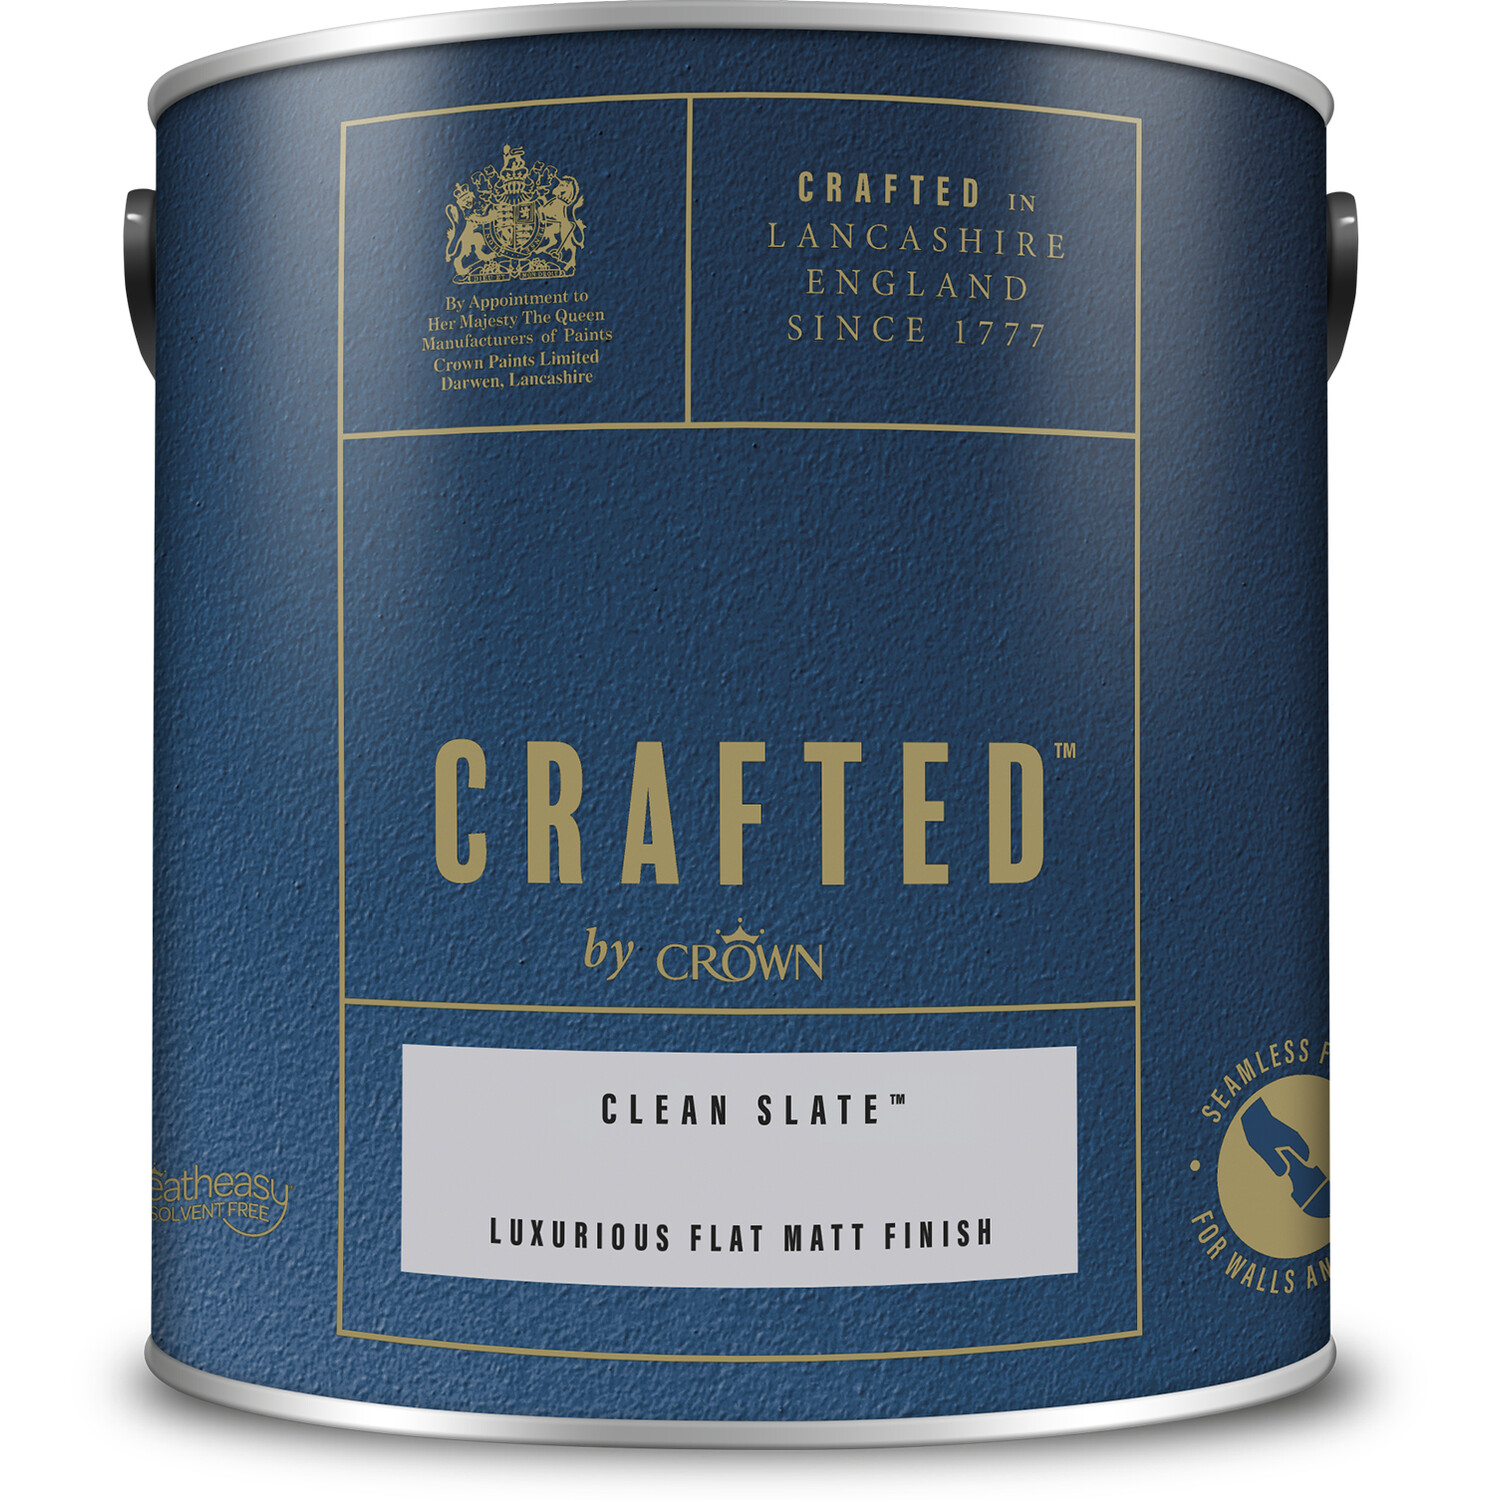 Crown Crafted Walls and Wood Clean Slate Luxurious Flat Matt Paint 2.5L Image 2